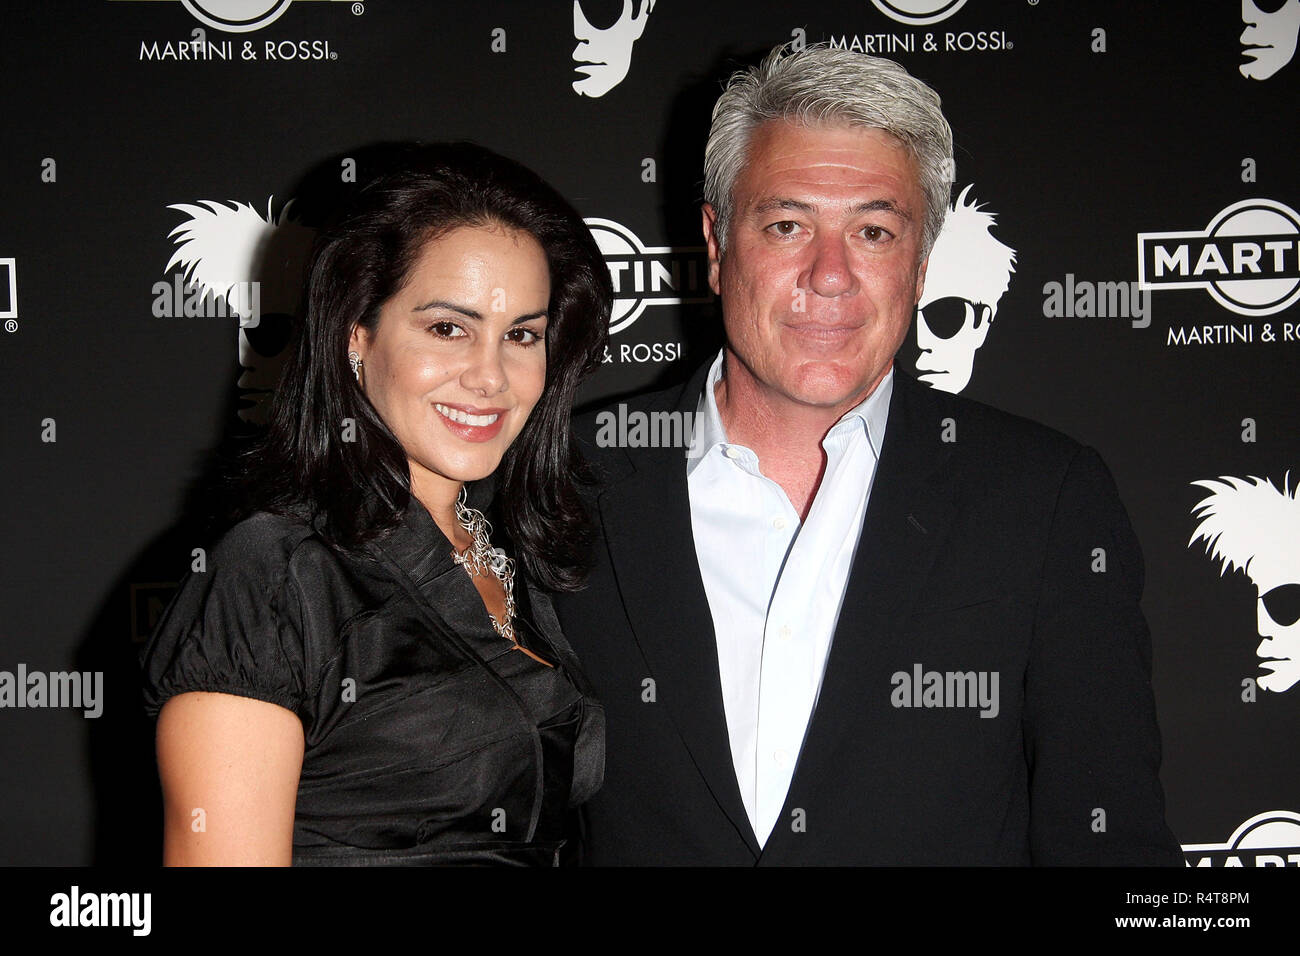 NEW YORK - AUGUST 6: Michelle Beauchamp and Jimmy Cefalo attend Andy Warhol's 80th birthday celebration at the New Museum on August 6, 2008 in New York City. (Photo by Steve Mack/S.D. Mack Pictures) Stock Photo